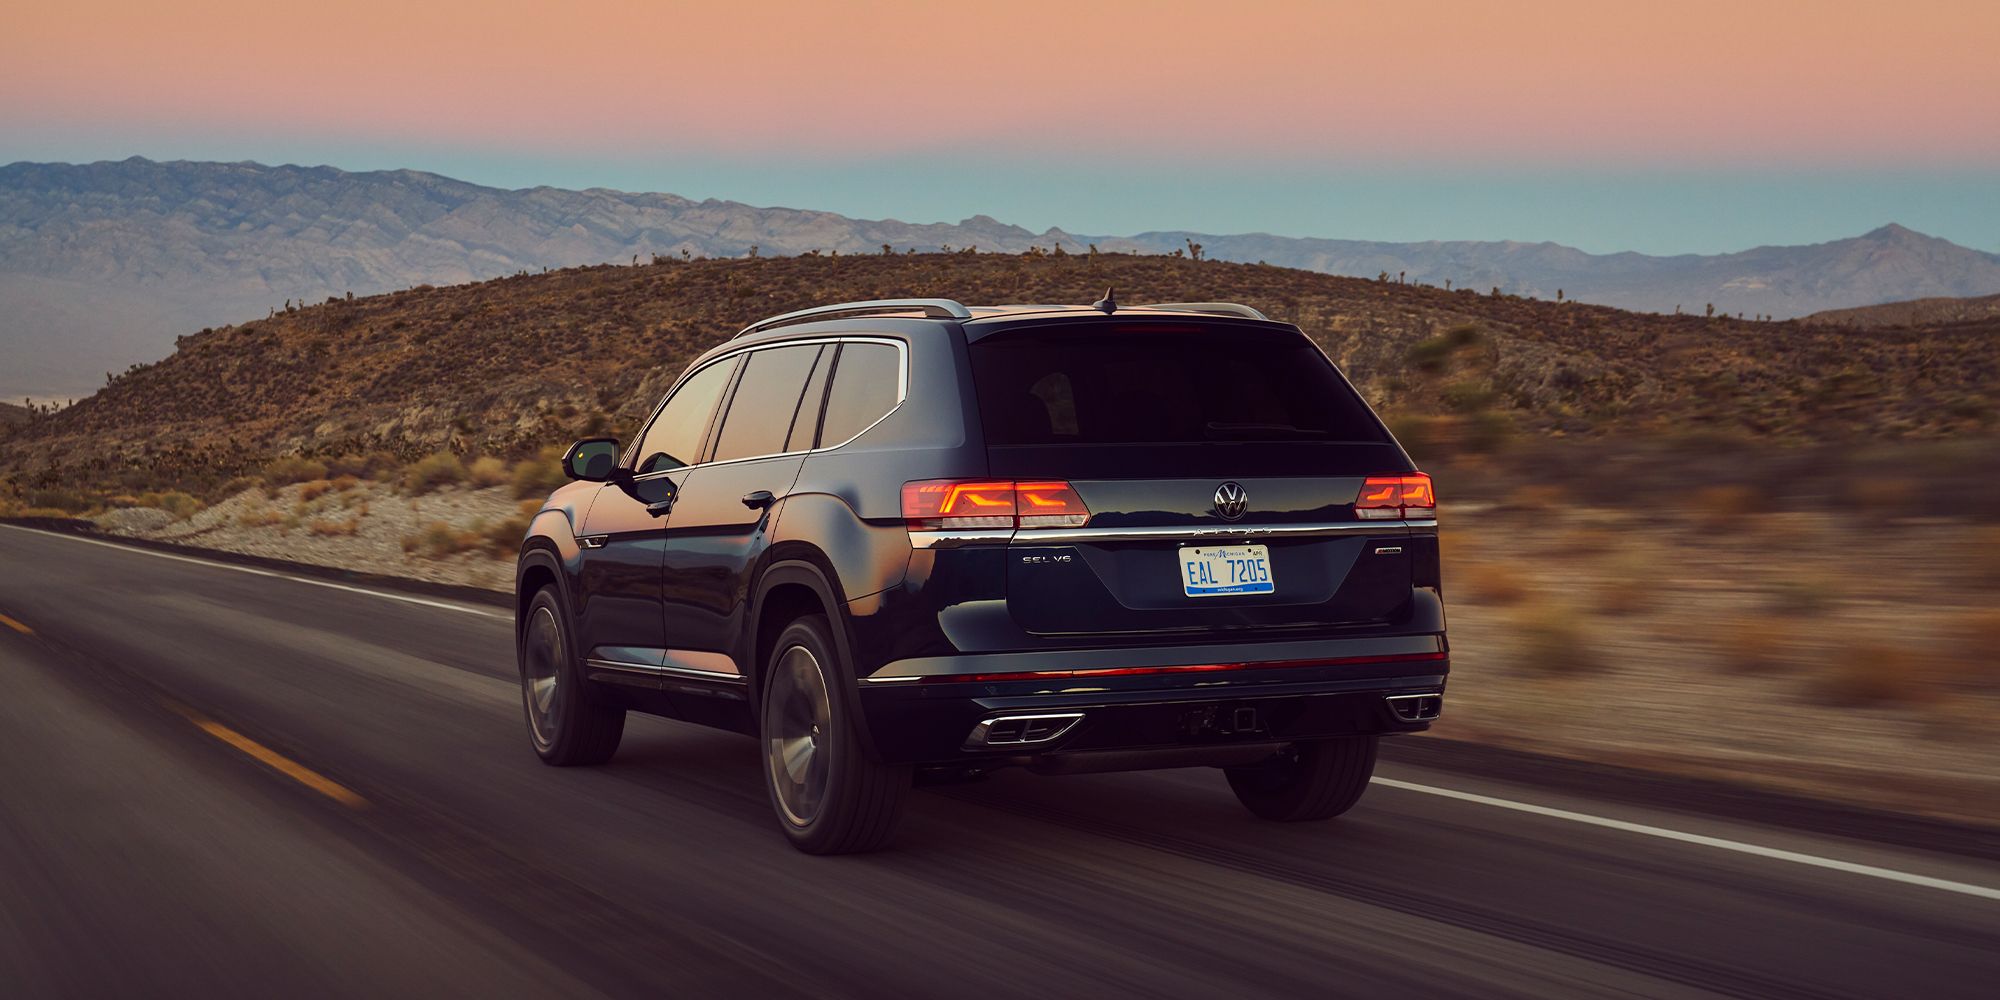 The Best Affordable Family SUVs To Buy In 2022